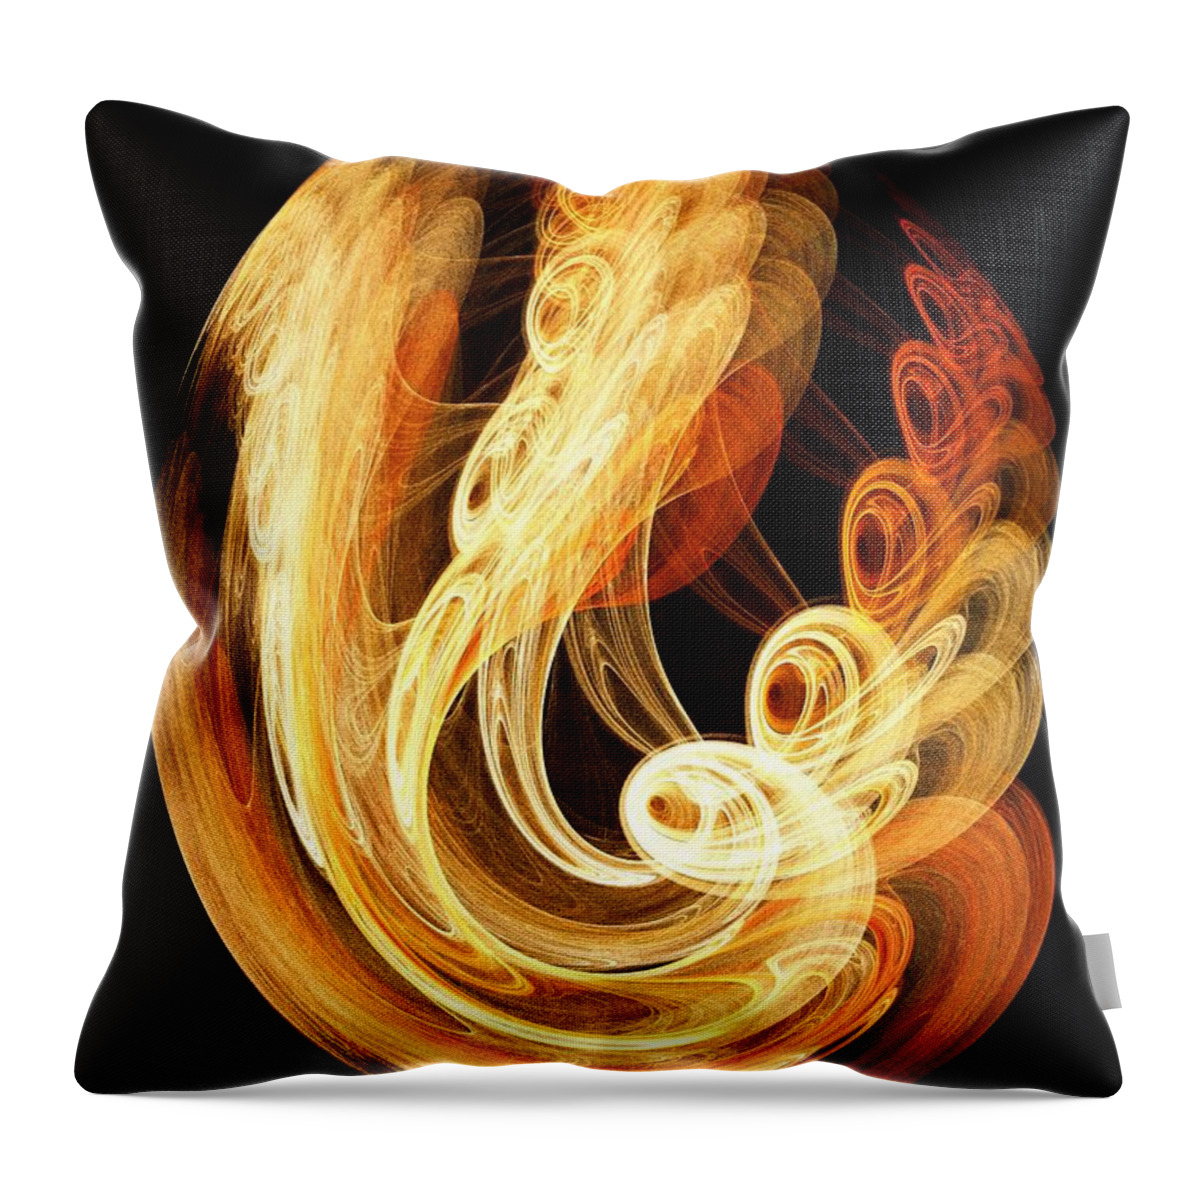 Introspection Throw Pillow featuring the digital art Introspection by Elizabeth McTaggart